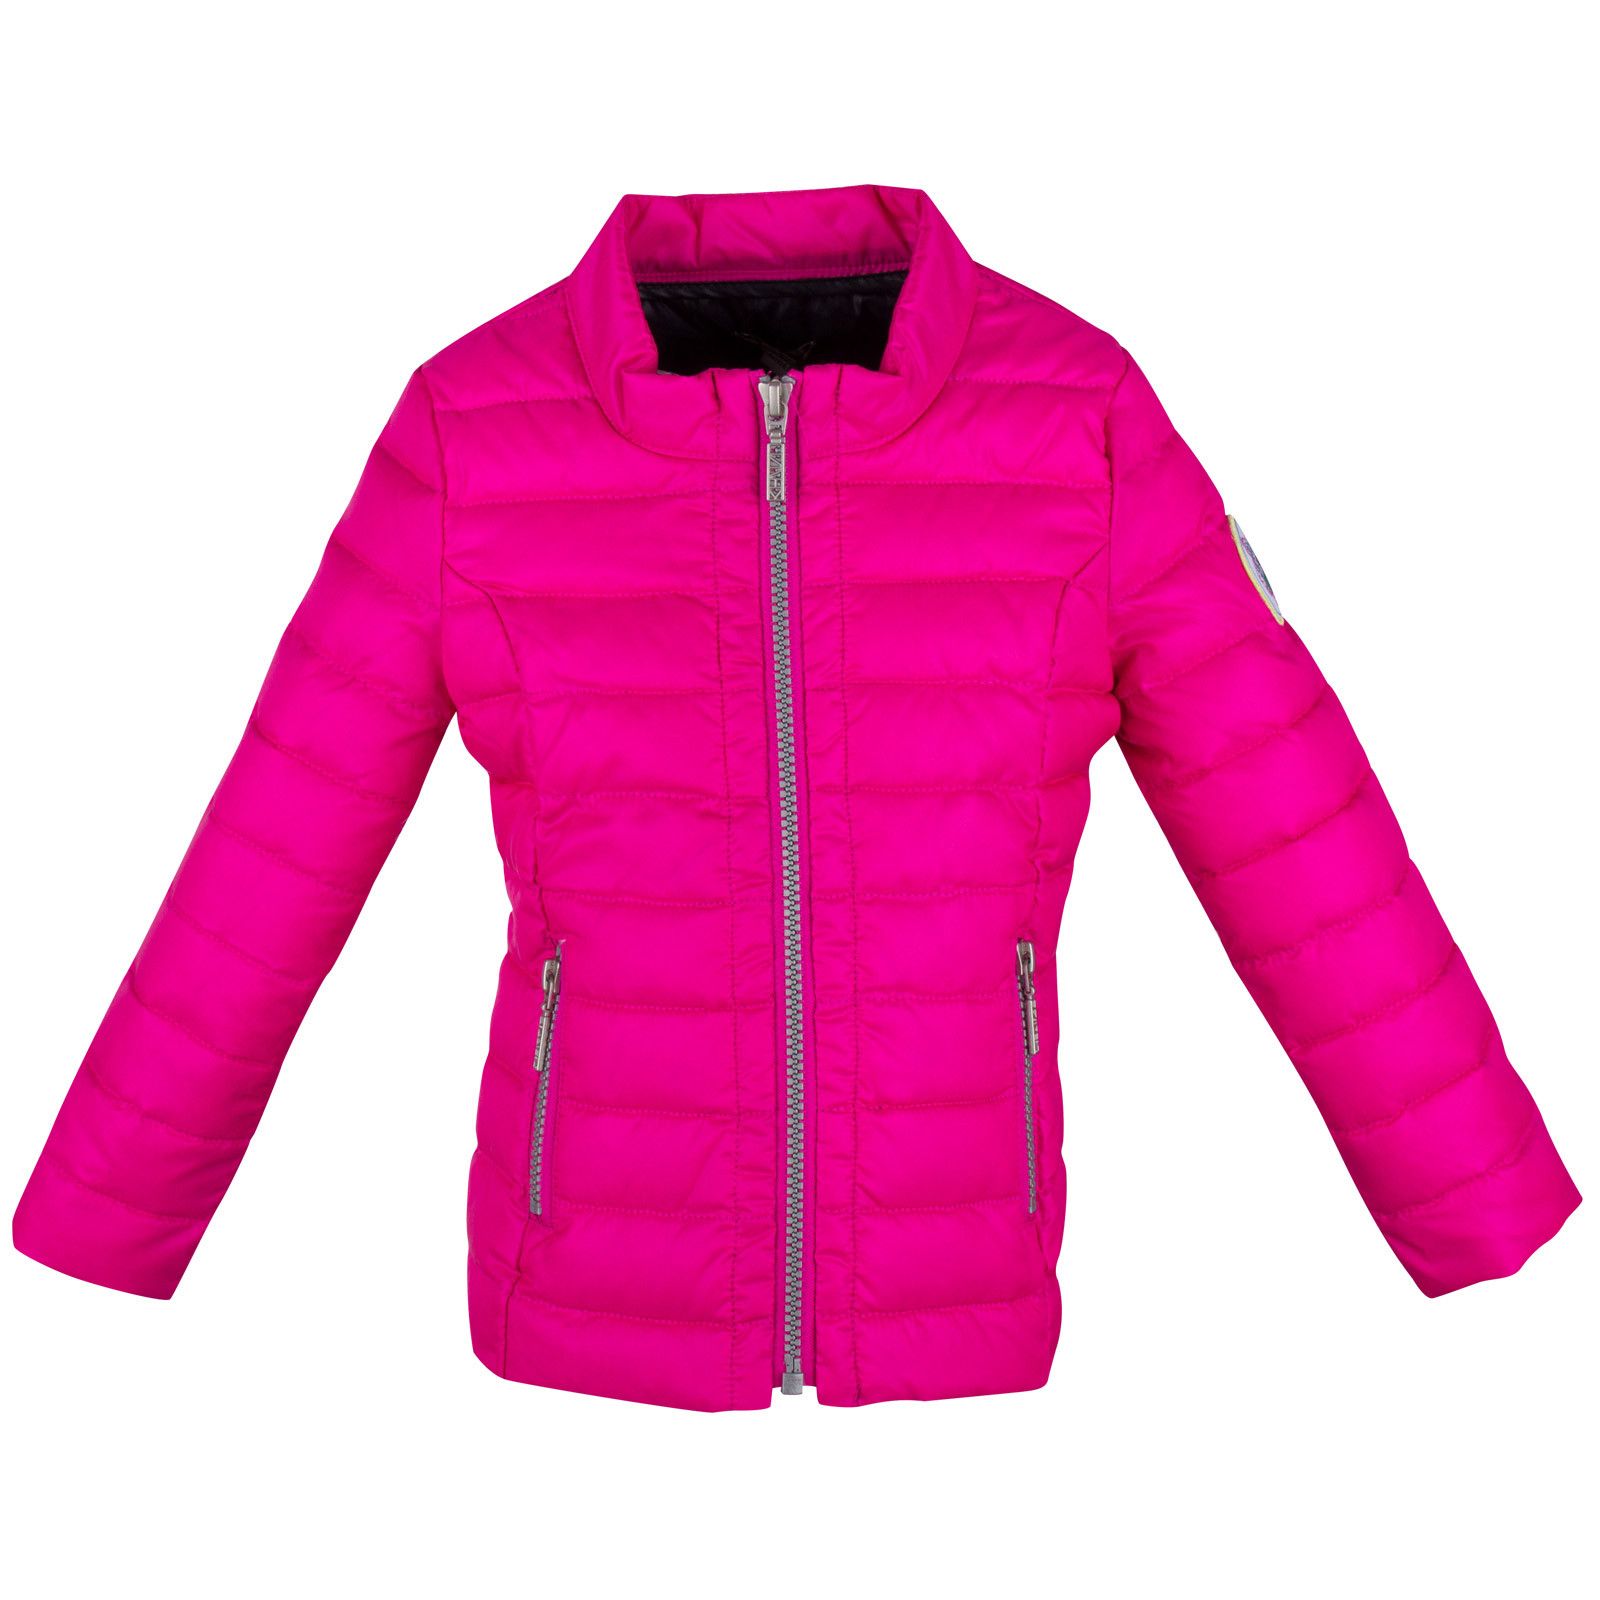 Girls Pink Down Padded Jacket With Zipper Pockets - CÉMAROSE | Children's Fashion Store - 1